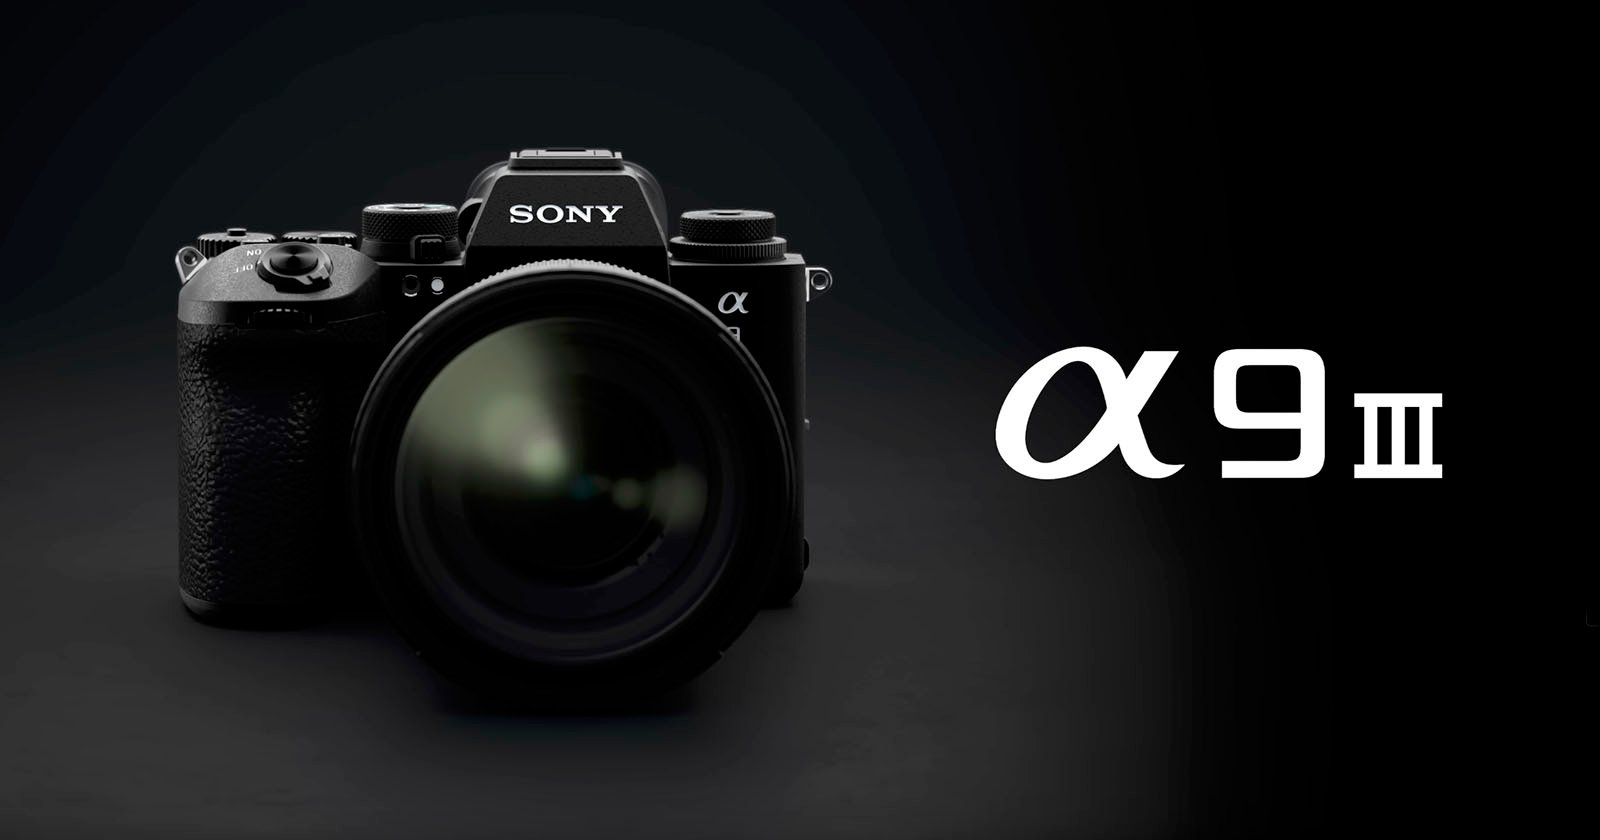 Why Flash Duration Matters for the Sony a9 IIIs Super-Fast Flash Sync